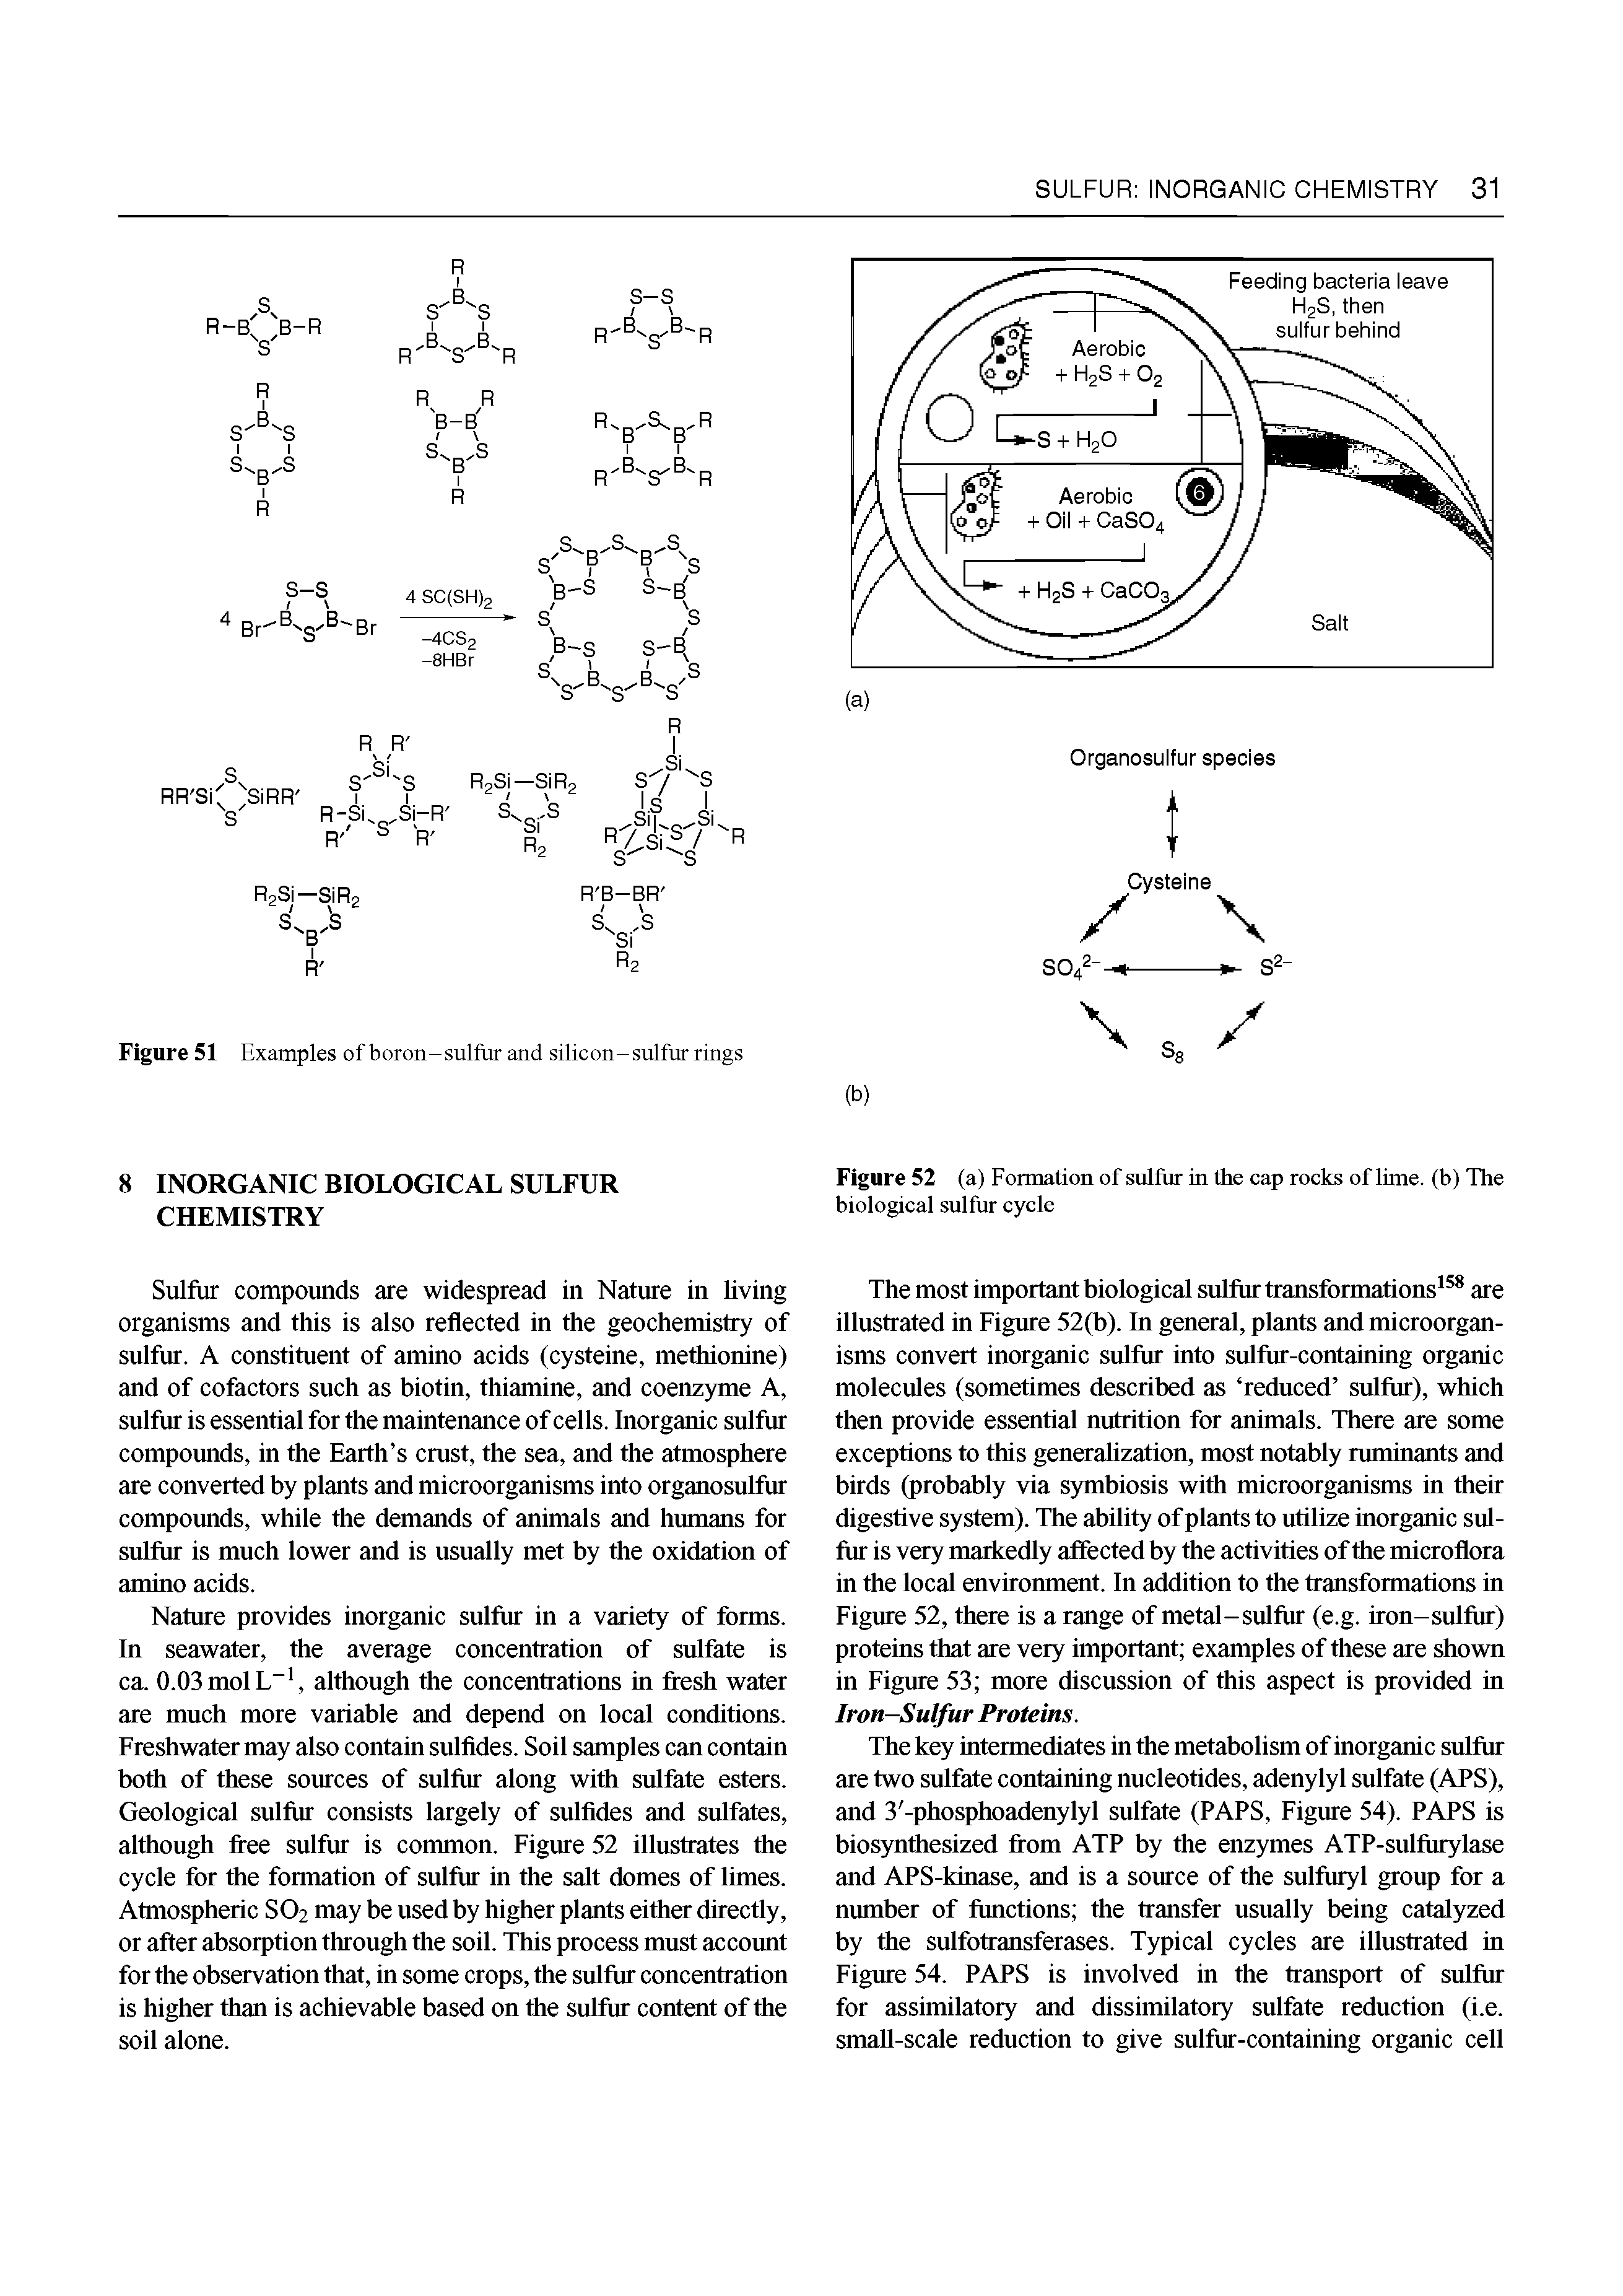 Figure 51 Examples of boron-sulfur and silicon-sulfur rings...